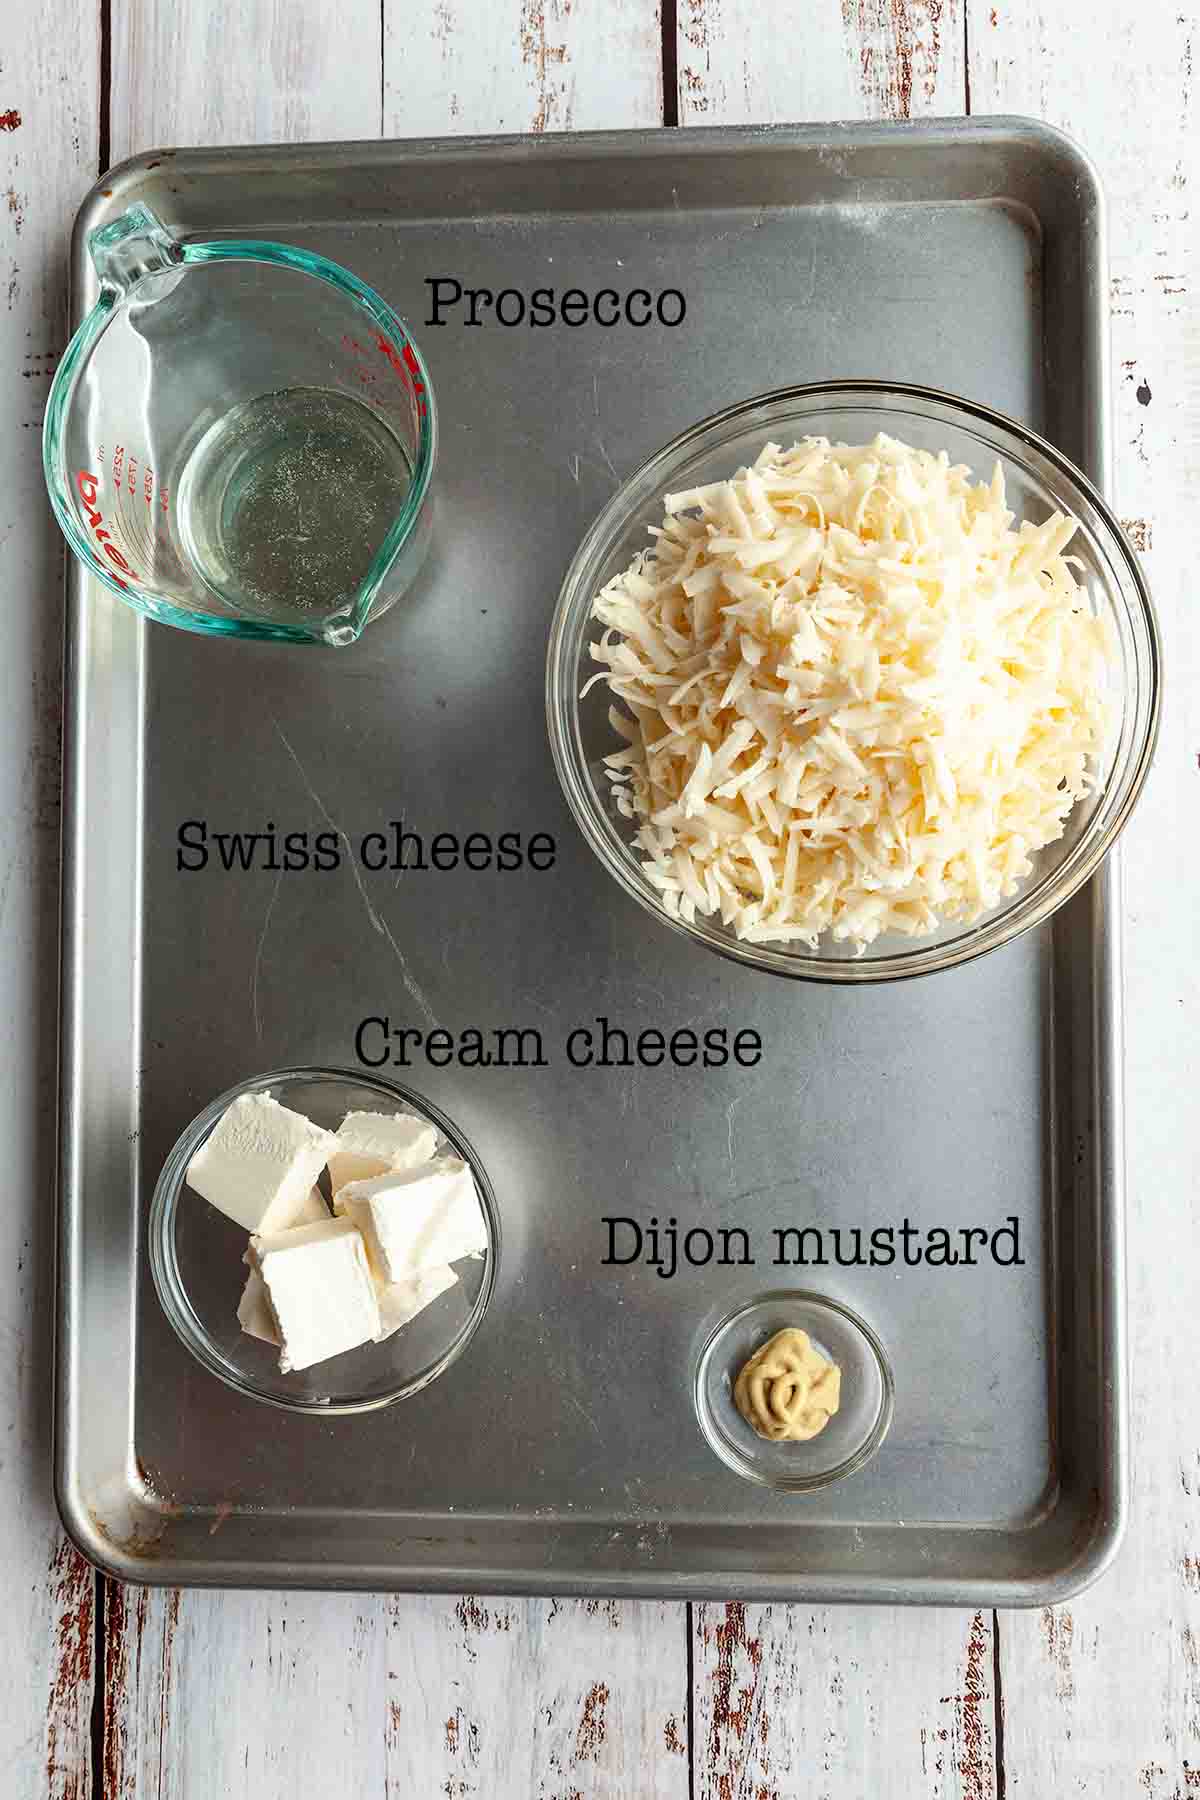 Ingredients for Swiss cheese dip--Prosecco, Swiss cheese, cream cheese, and Dijon mustard.